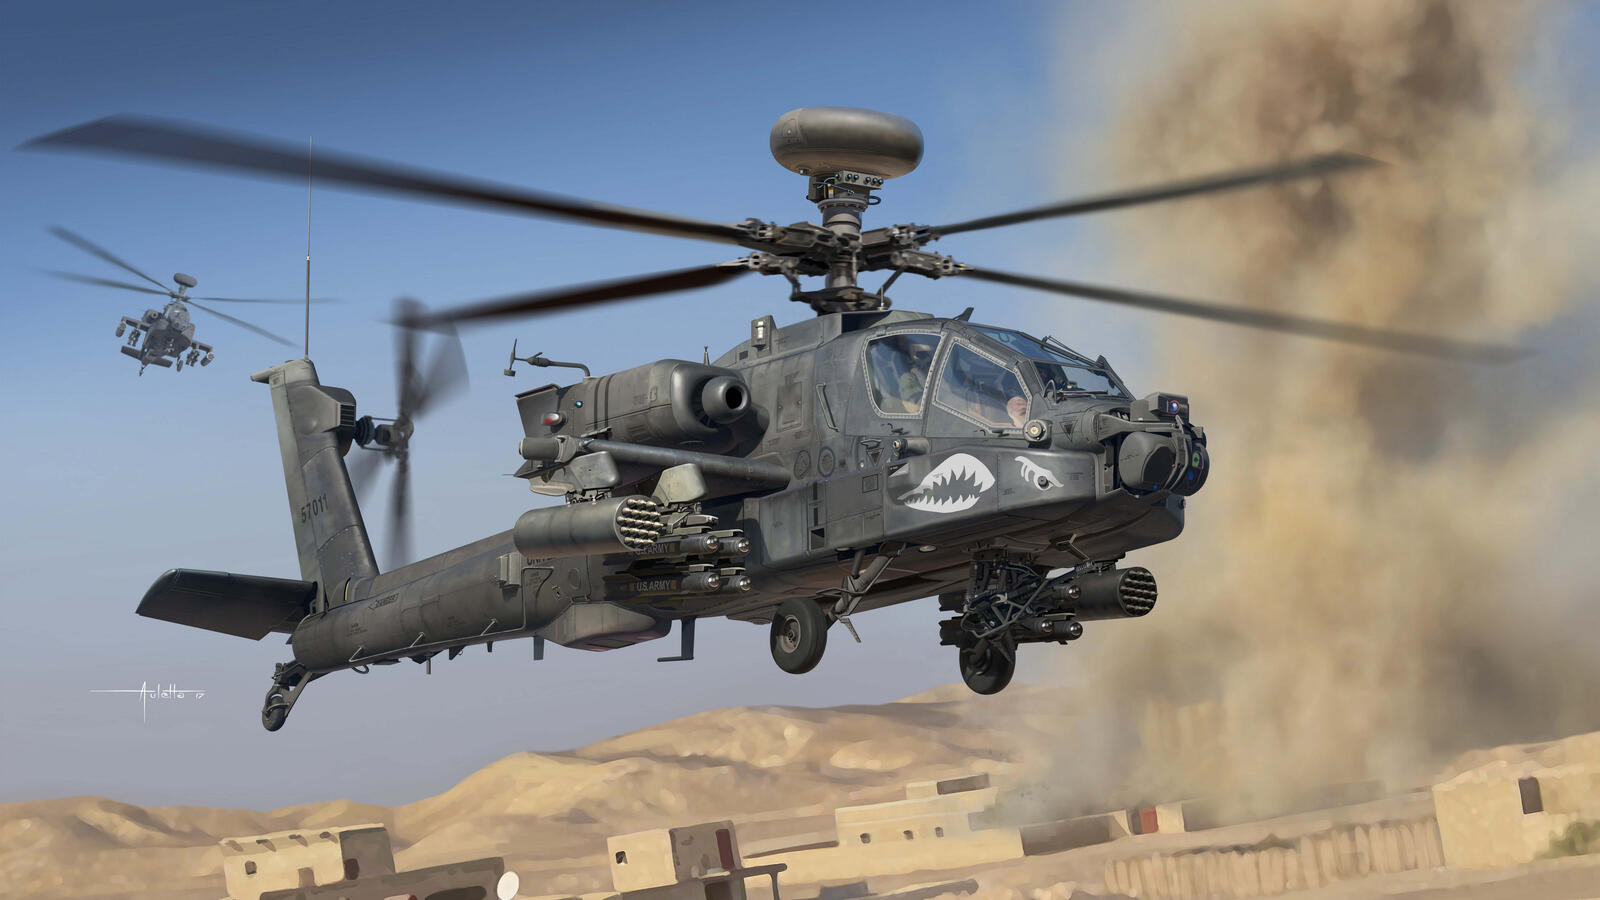 Wallpapers helicopter art aviation on the desktop